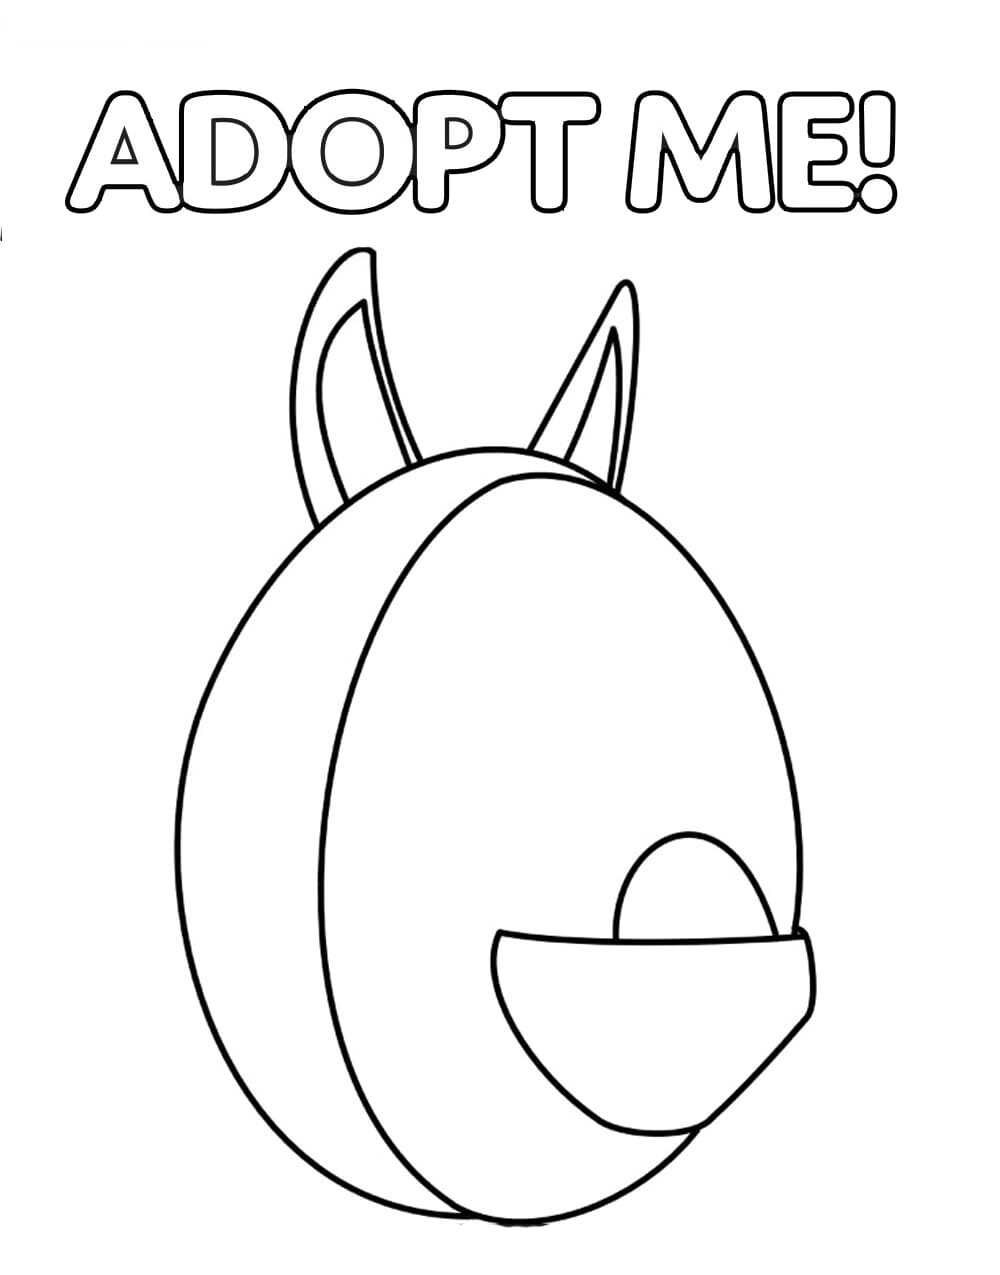 Adopt Me Aussie Egg From The Gumball Machine Coloring Pages